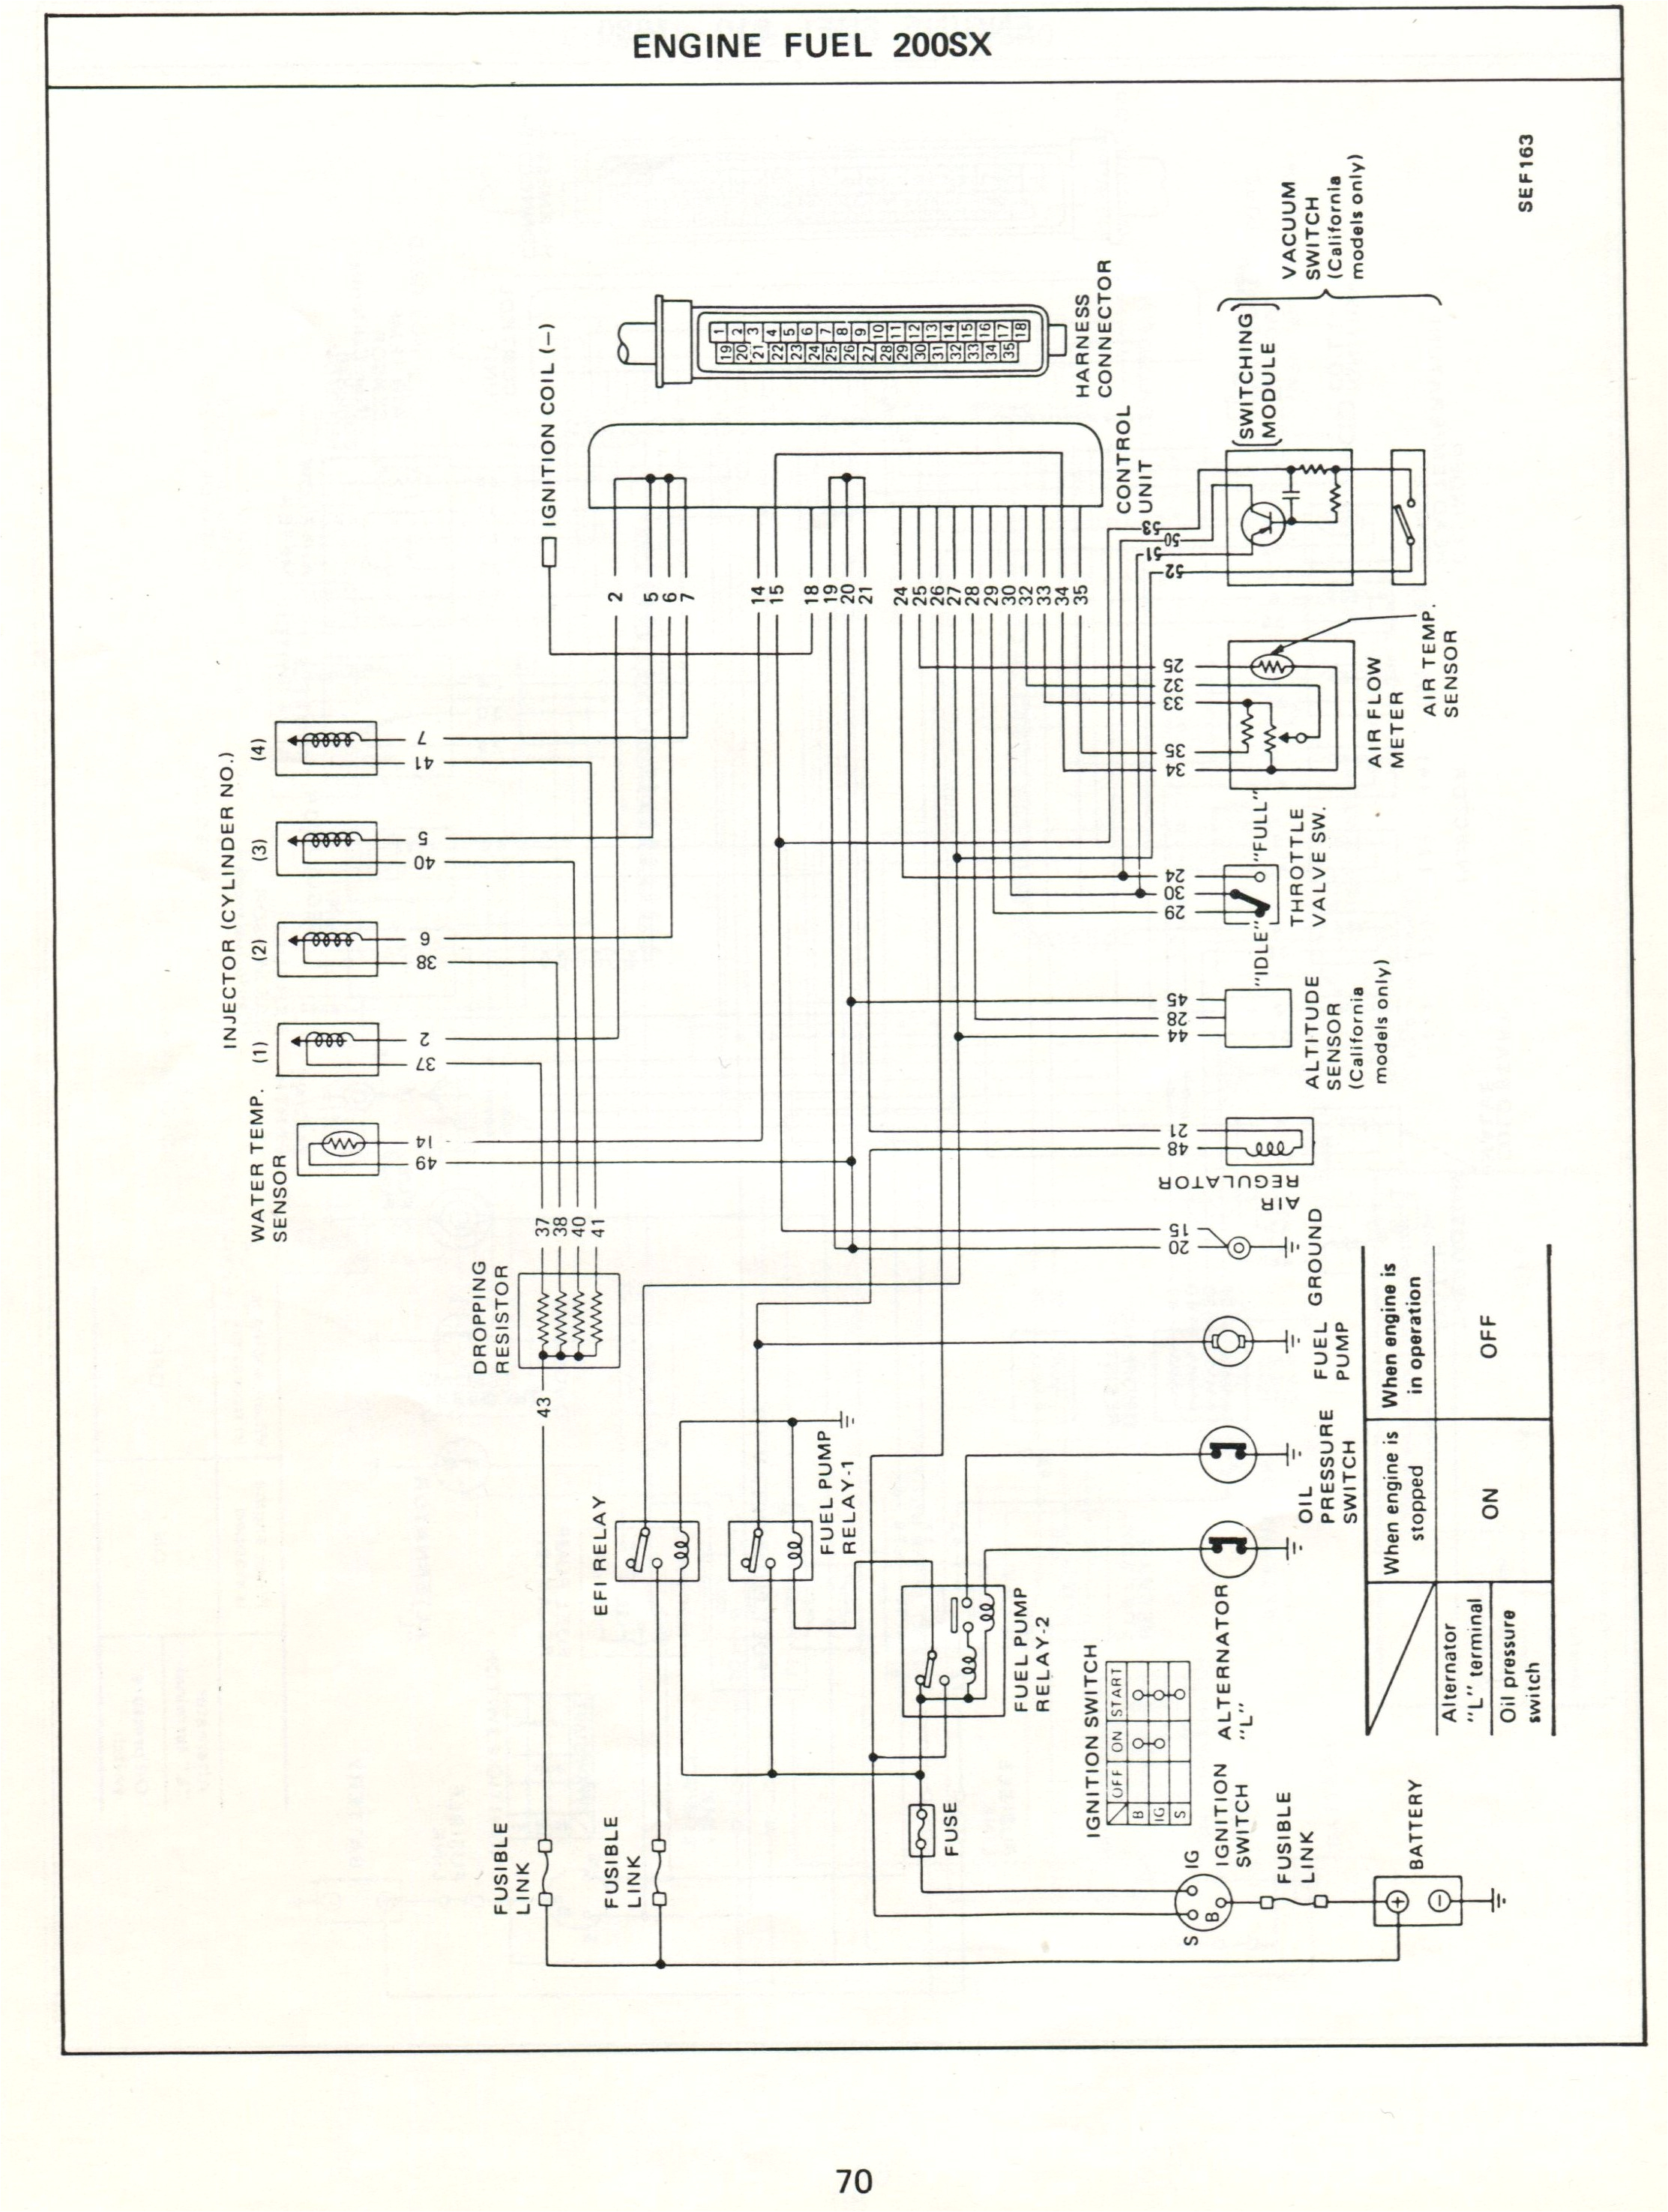 80 280zx harness pinout diagram wiring diagram inside 80 280zx harness pinout diagram